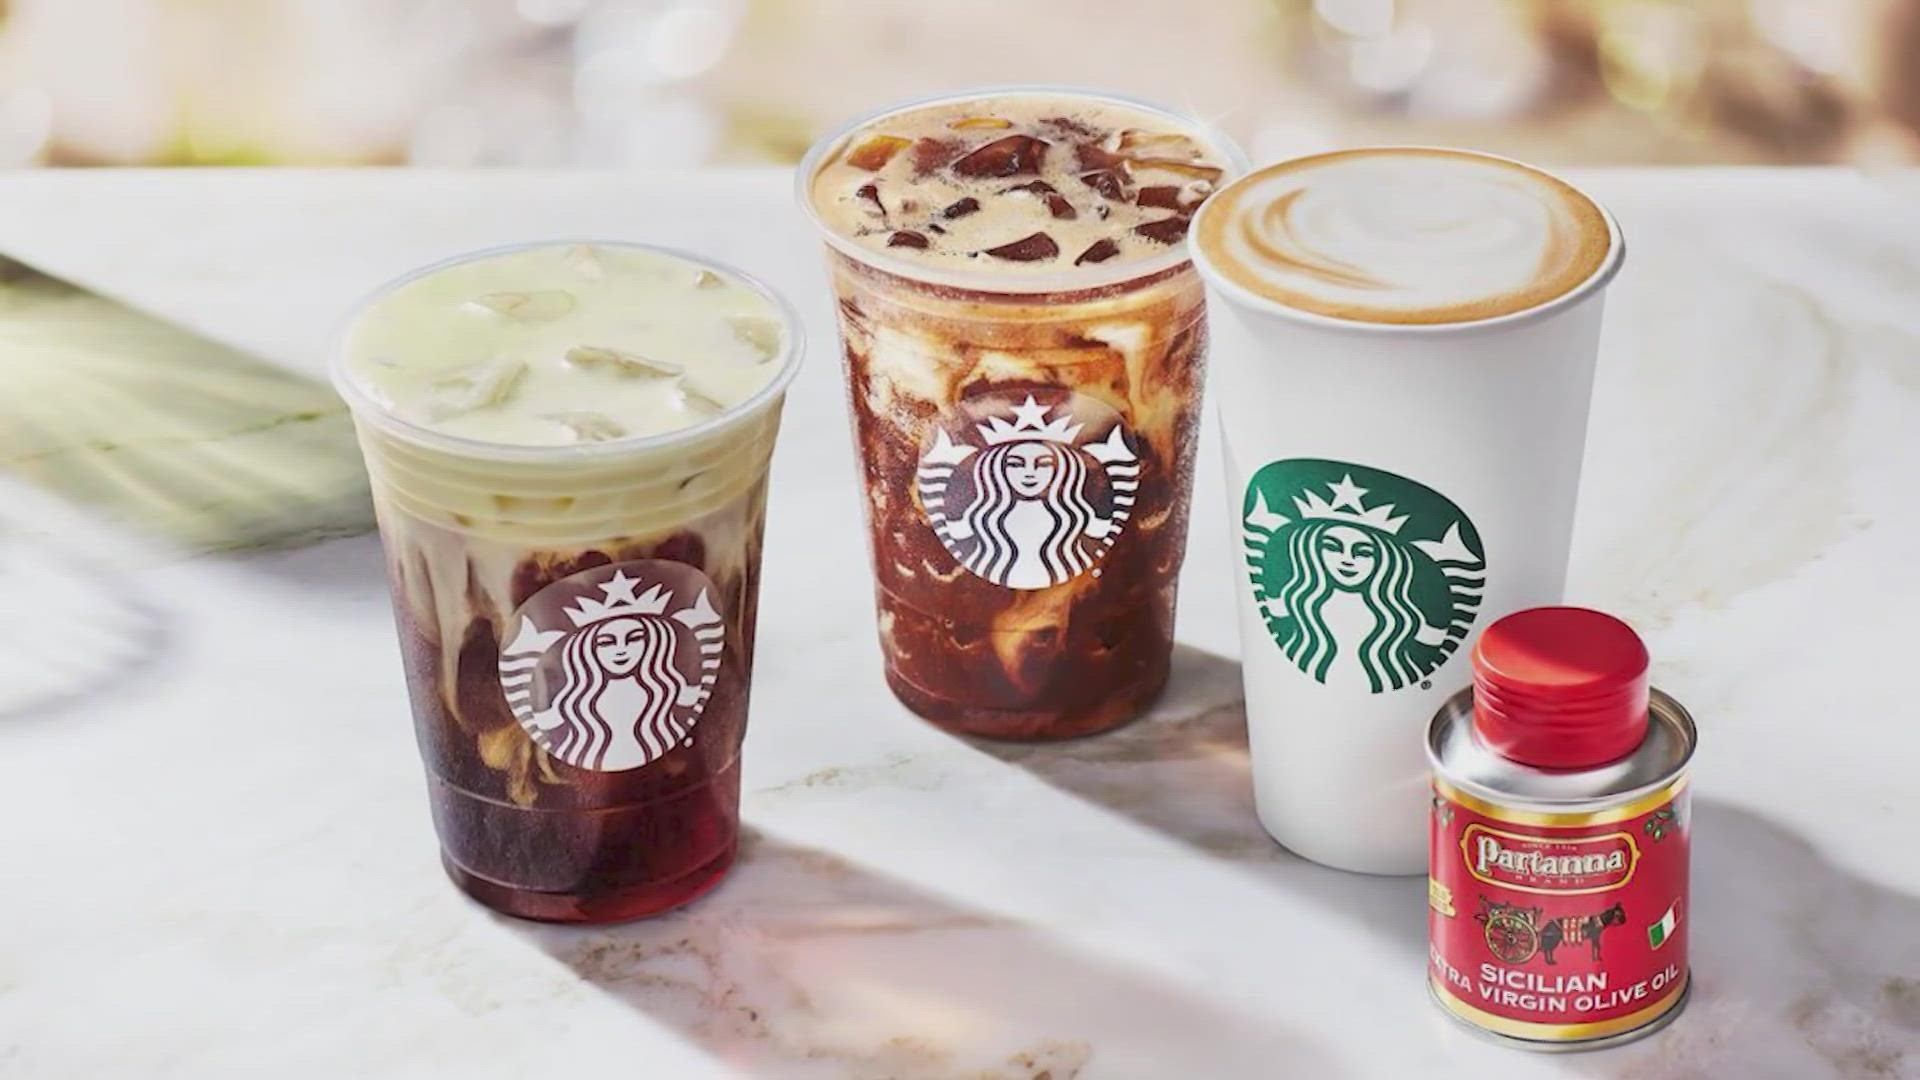 25 Years After The Bottled Frappuccino, Starbucks Rolls Out Cold & Crafted